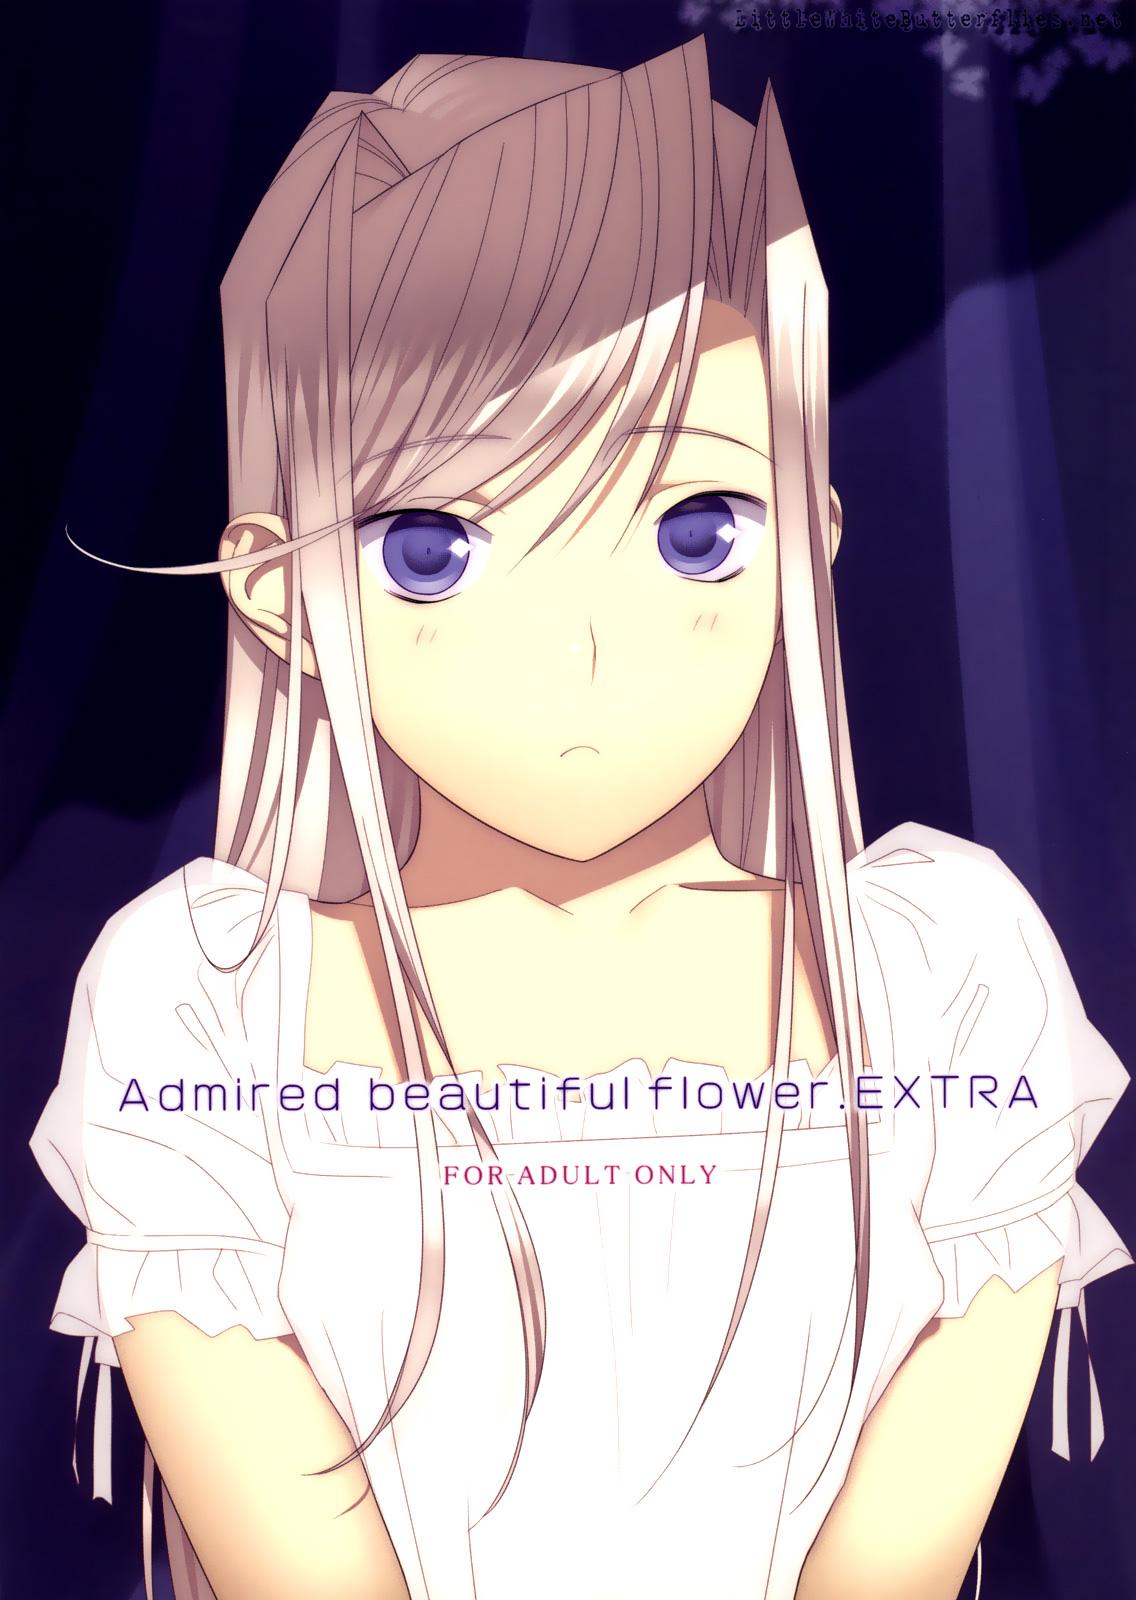 Rubbing Admired Beautiful Flower Extra - Princess lover Plug - Page 1